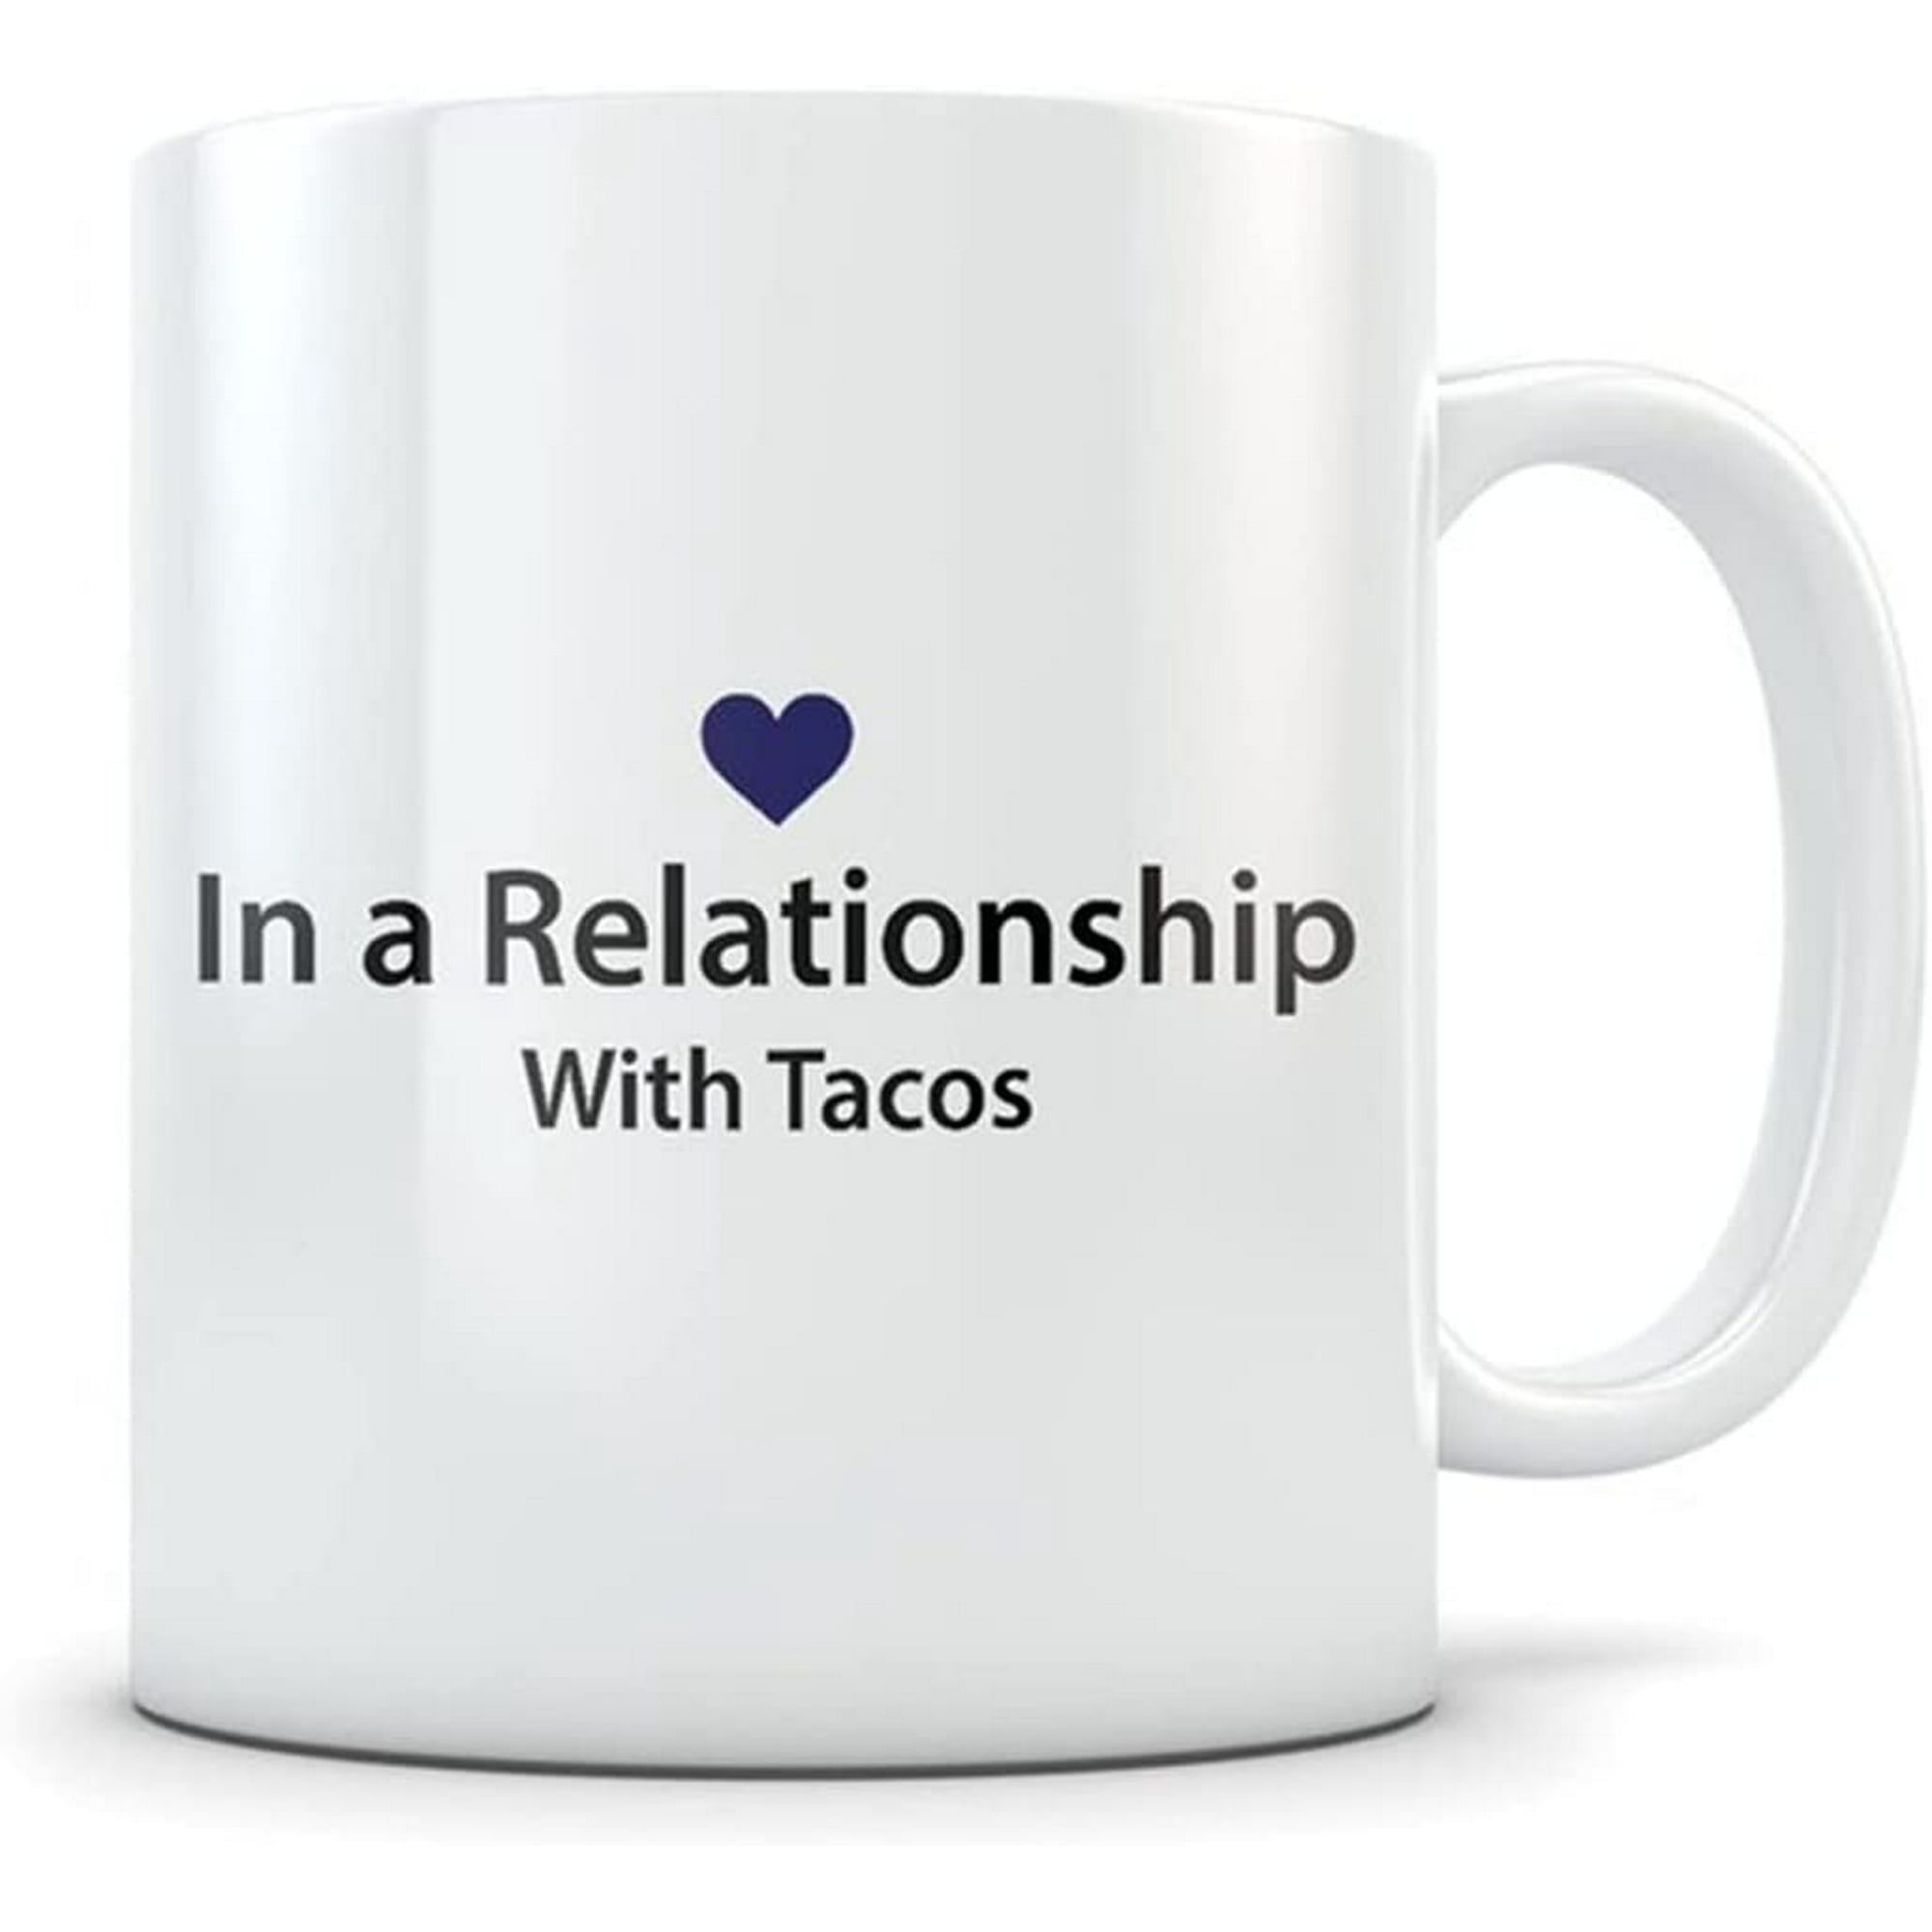 Taco Lover Gifts, Taco Mug, Taco Gift for Women and Men, Taco Themed Gifts,  Cute Taco Gift idea, Funny Mexican Food Gift | Walmart Canada